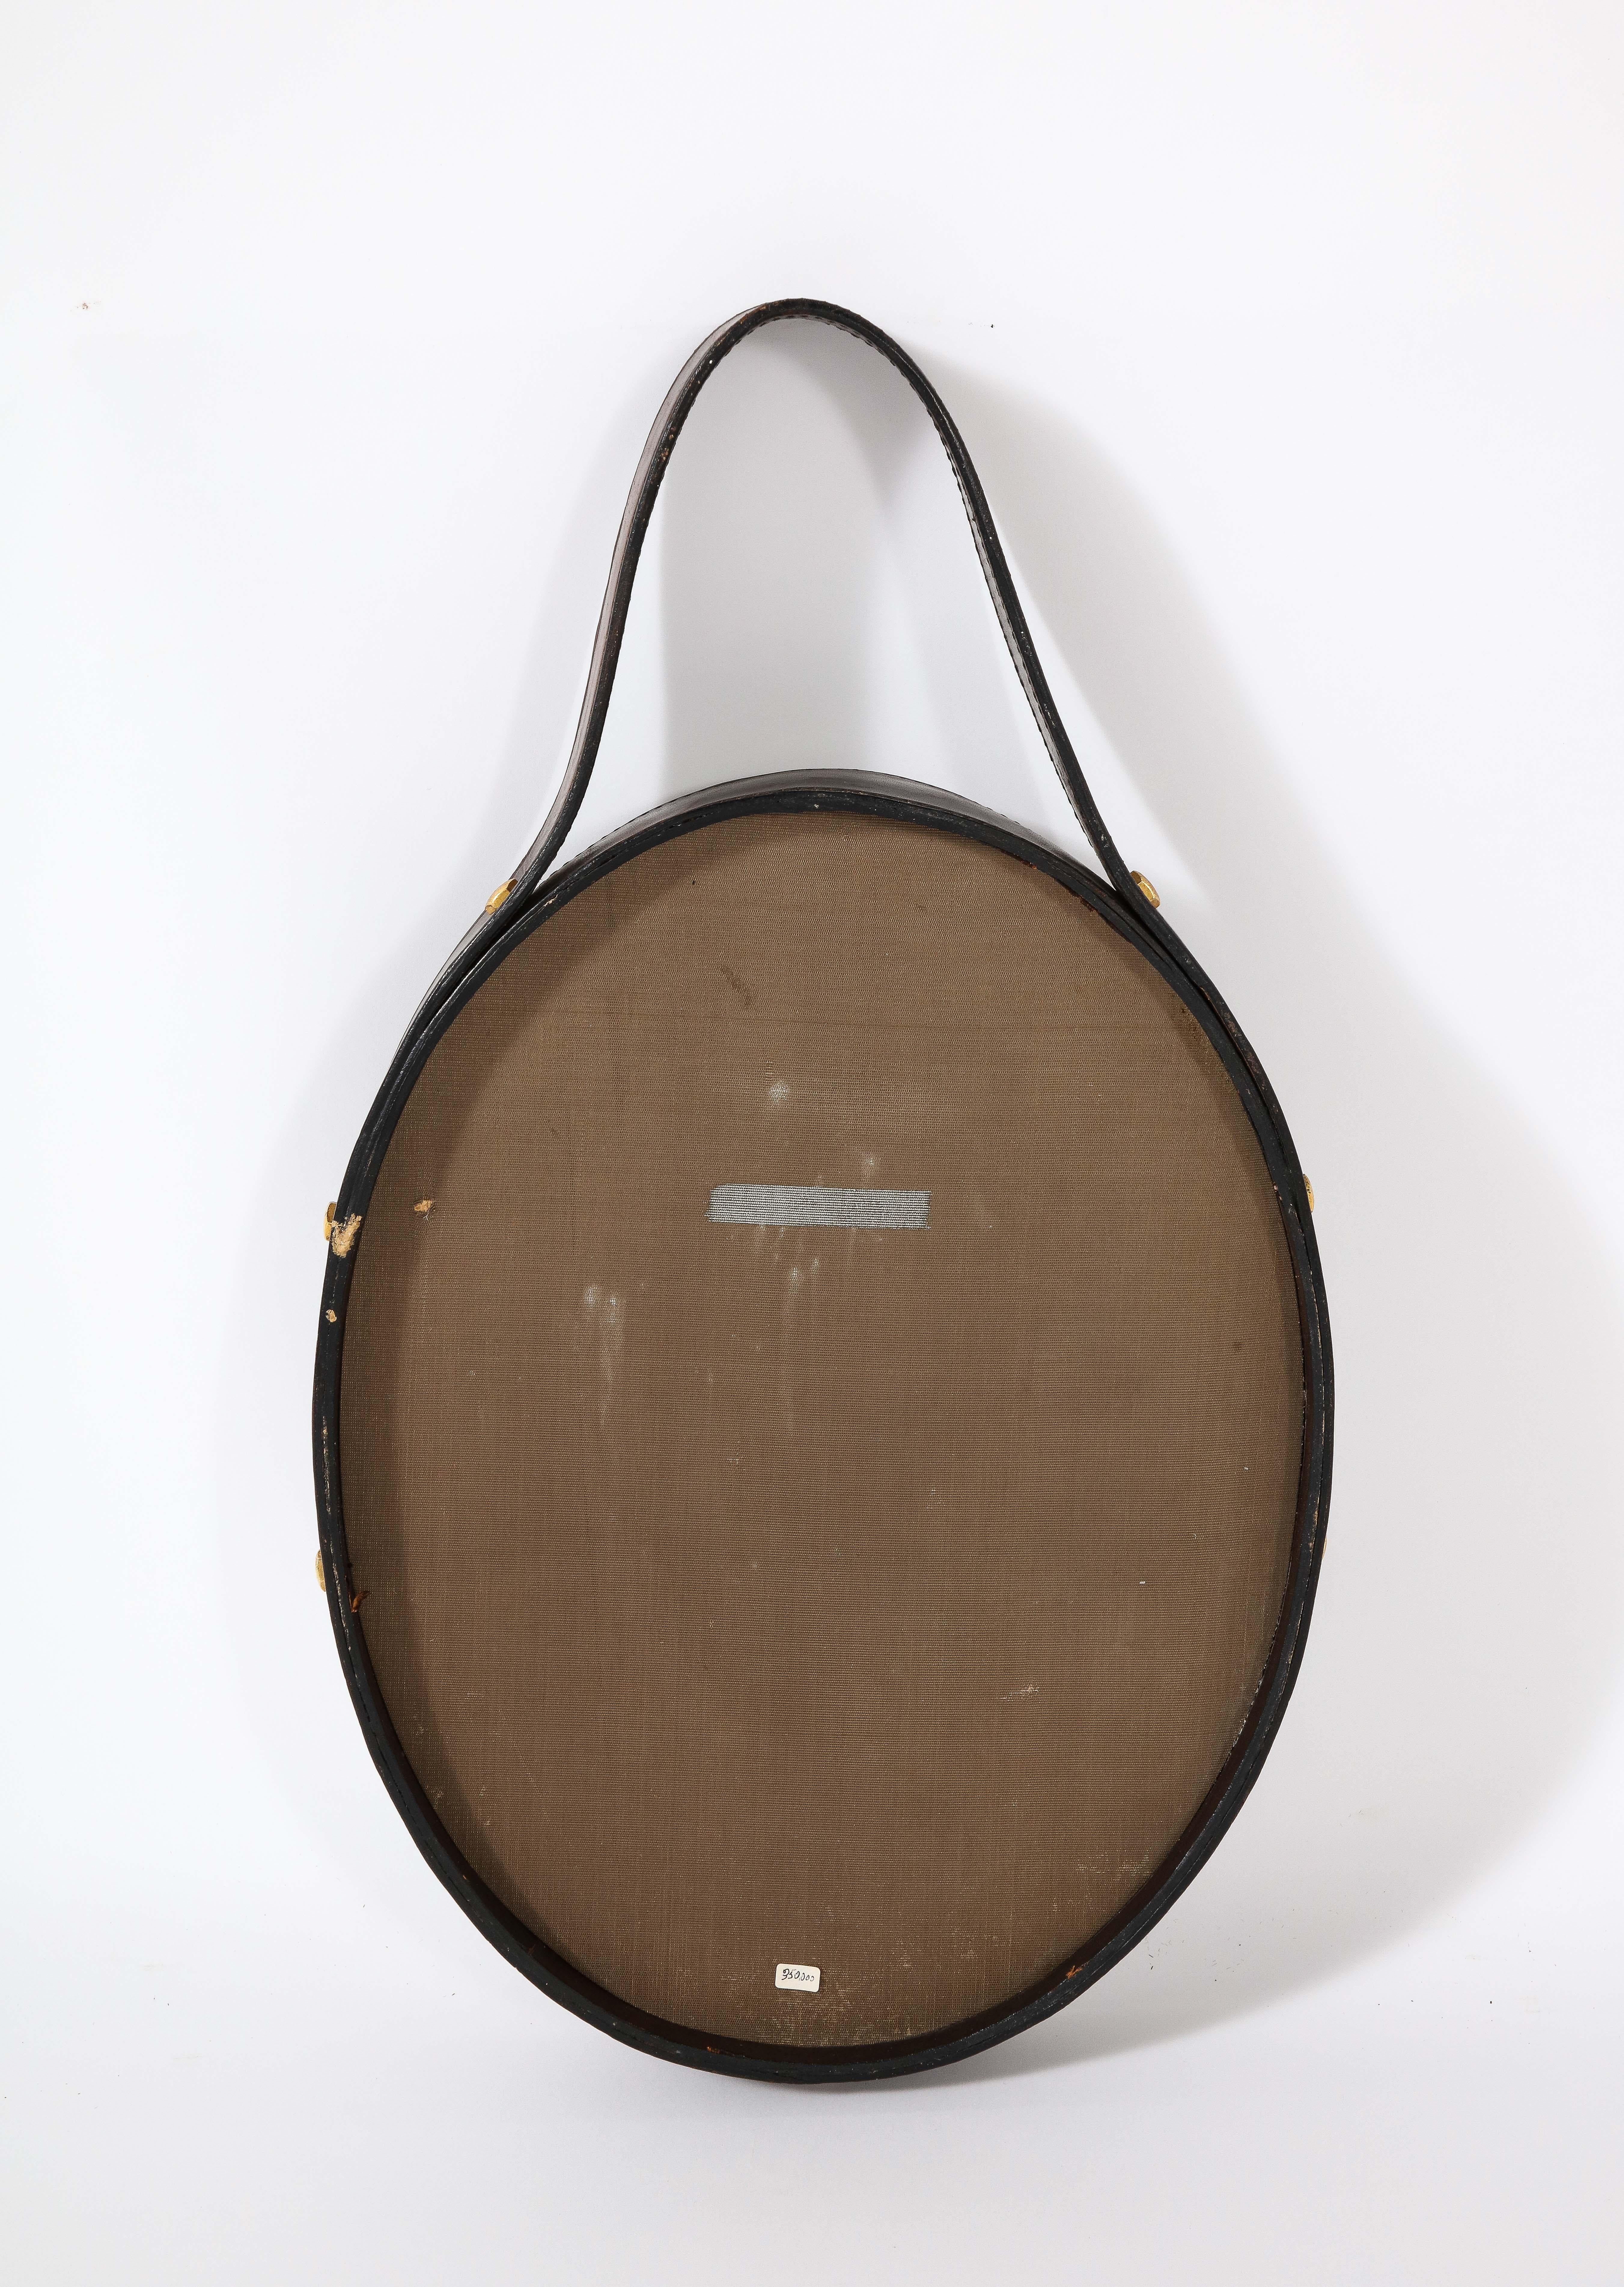 Florentine Leather Wrapped Oval Mirror, Italy, 1960's For Sale 2